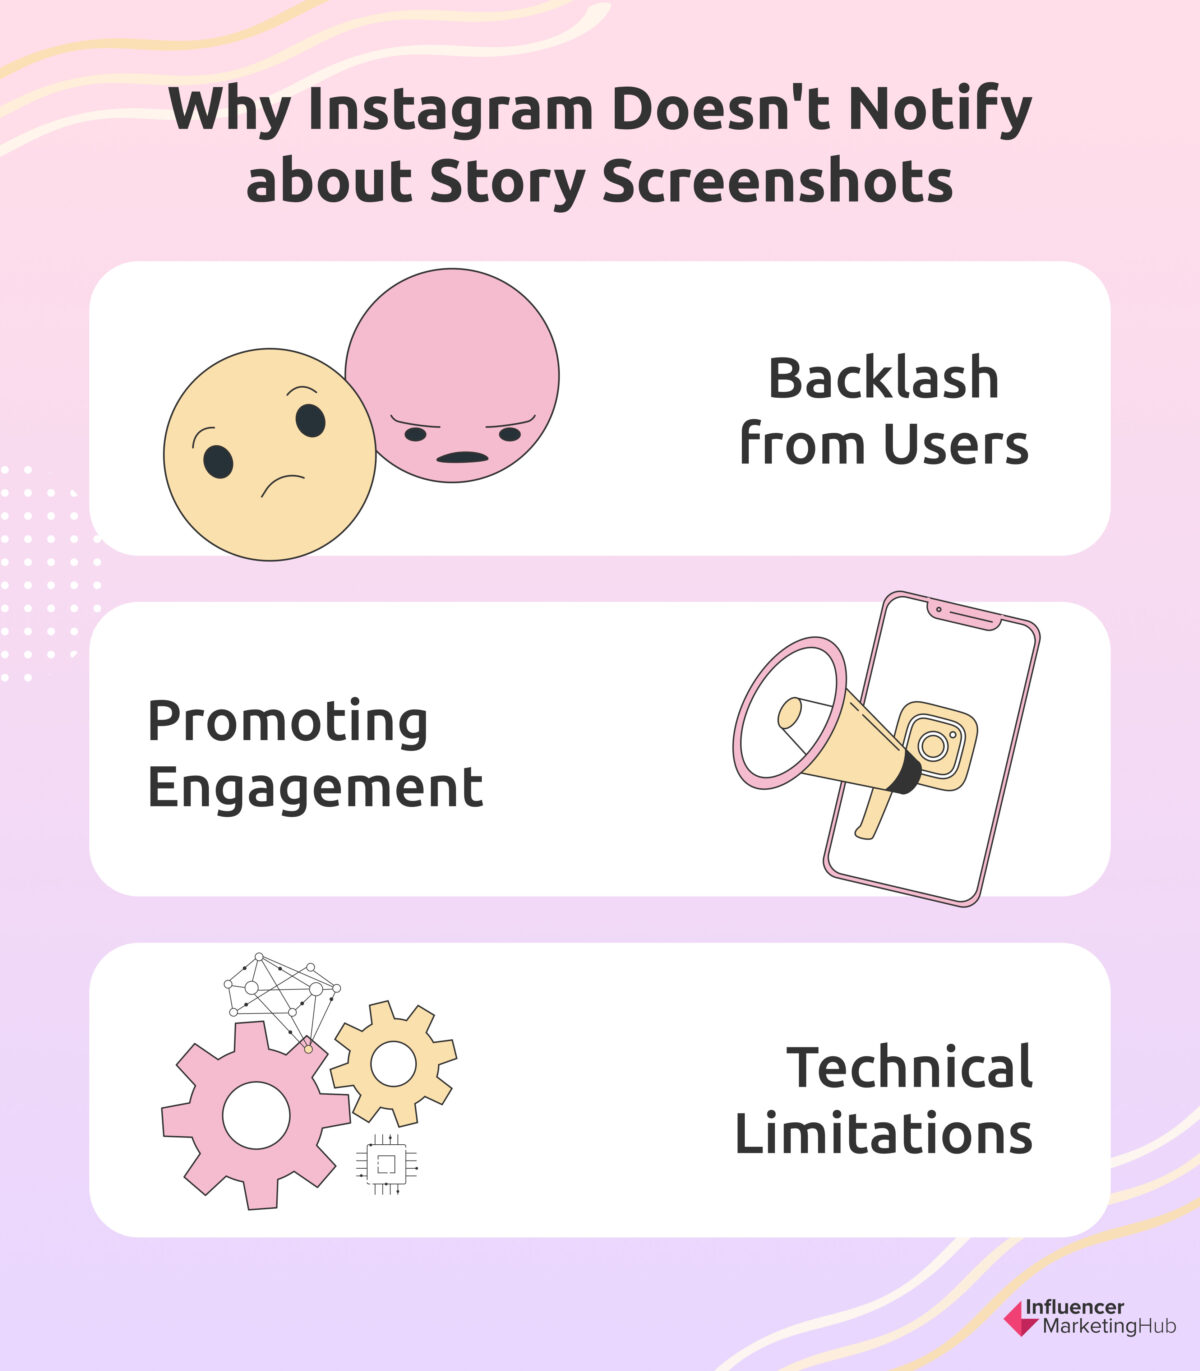 Does Instagram Notify Users About Screenshots of Stories?